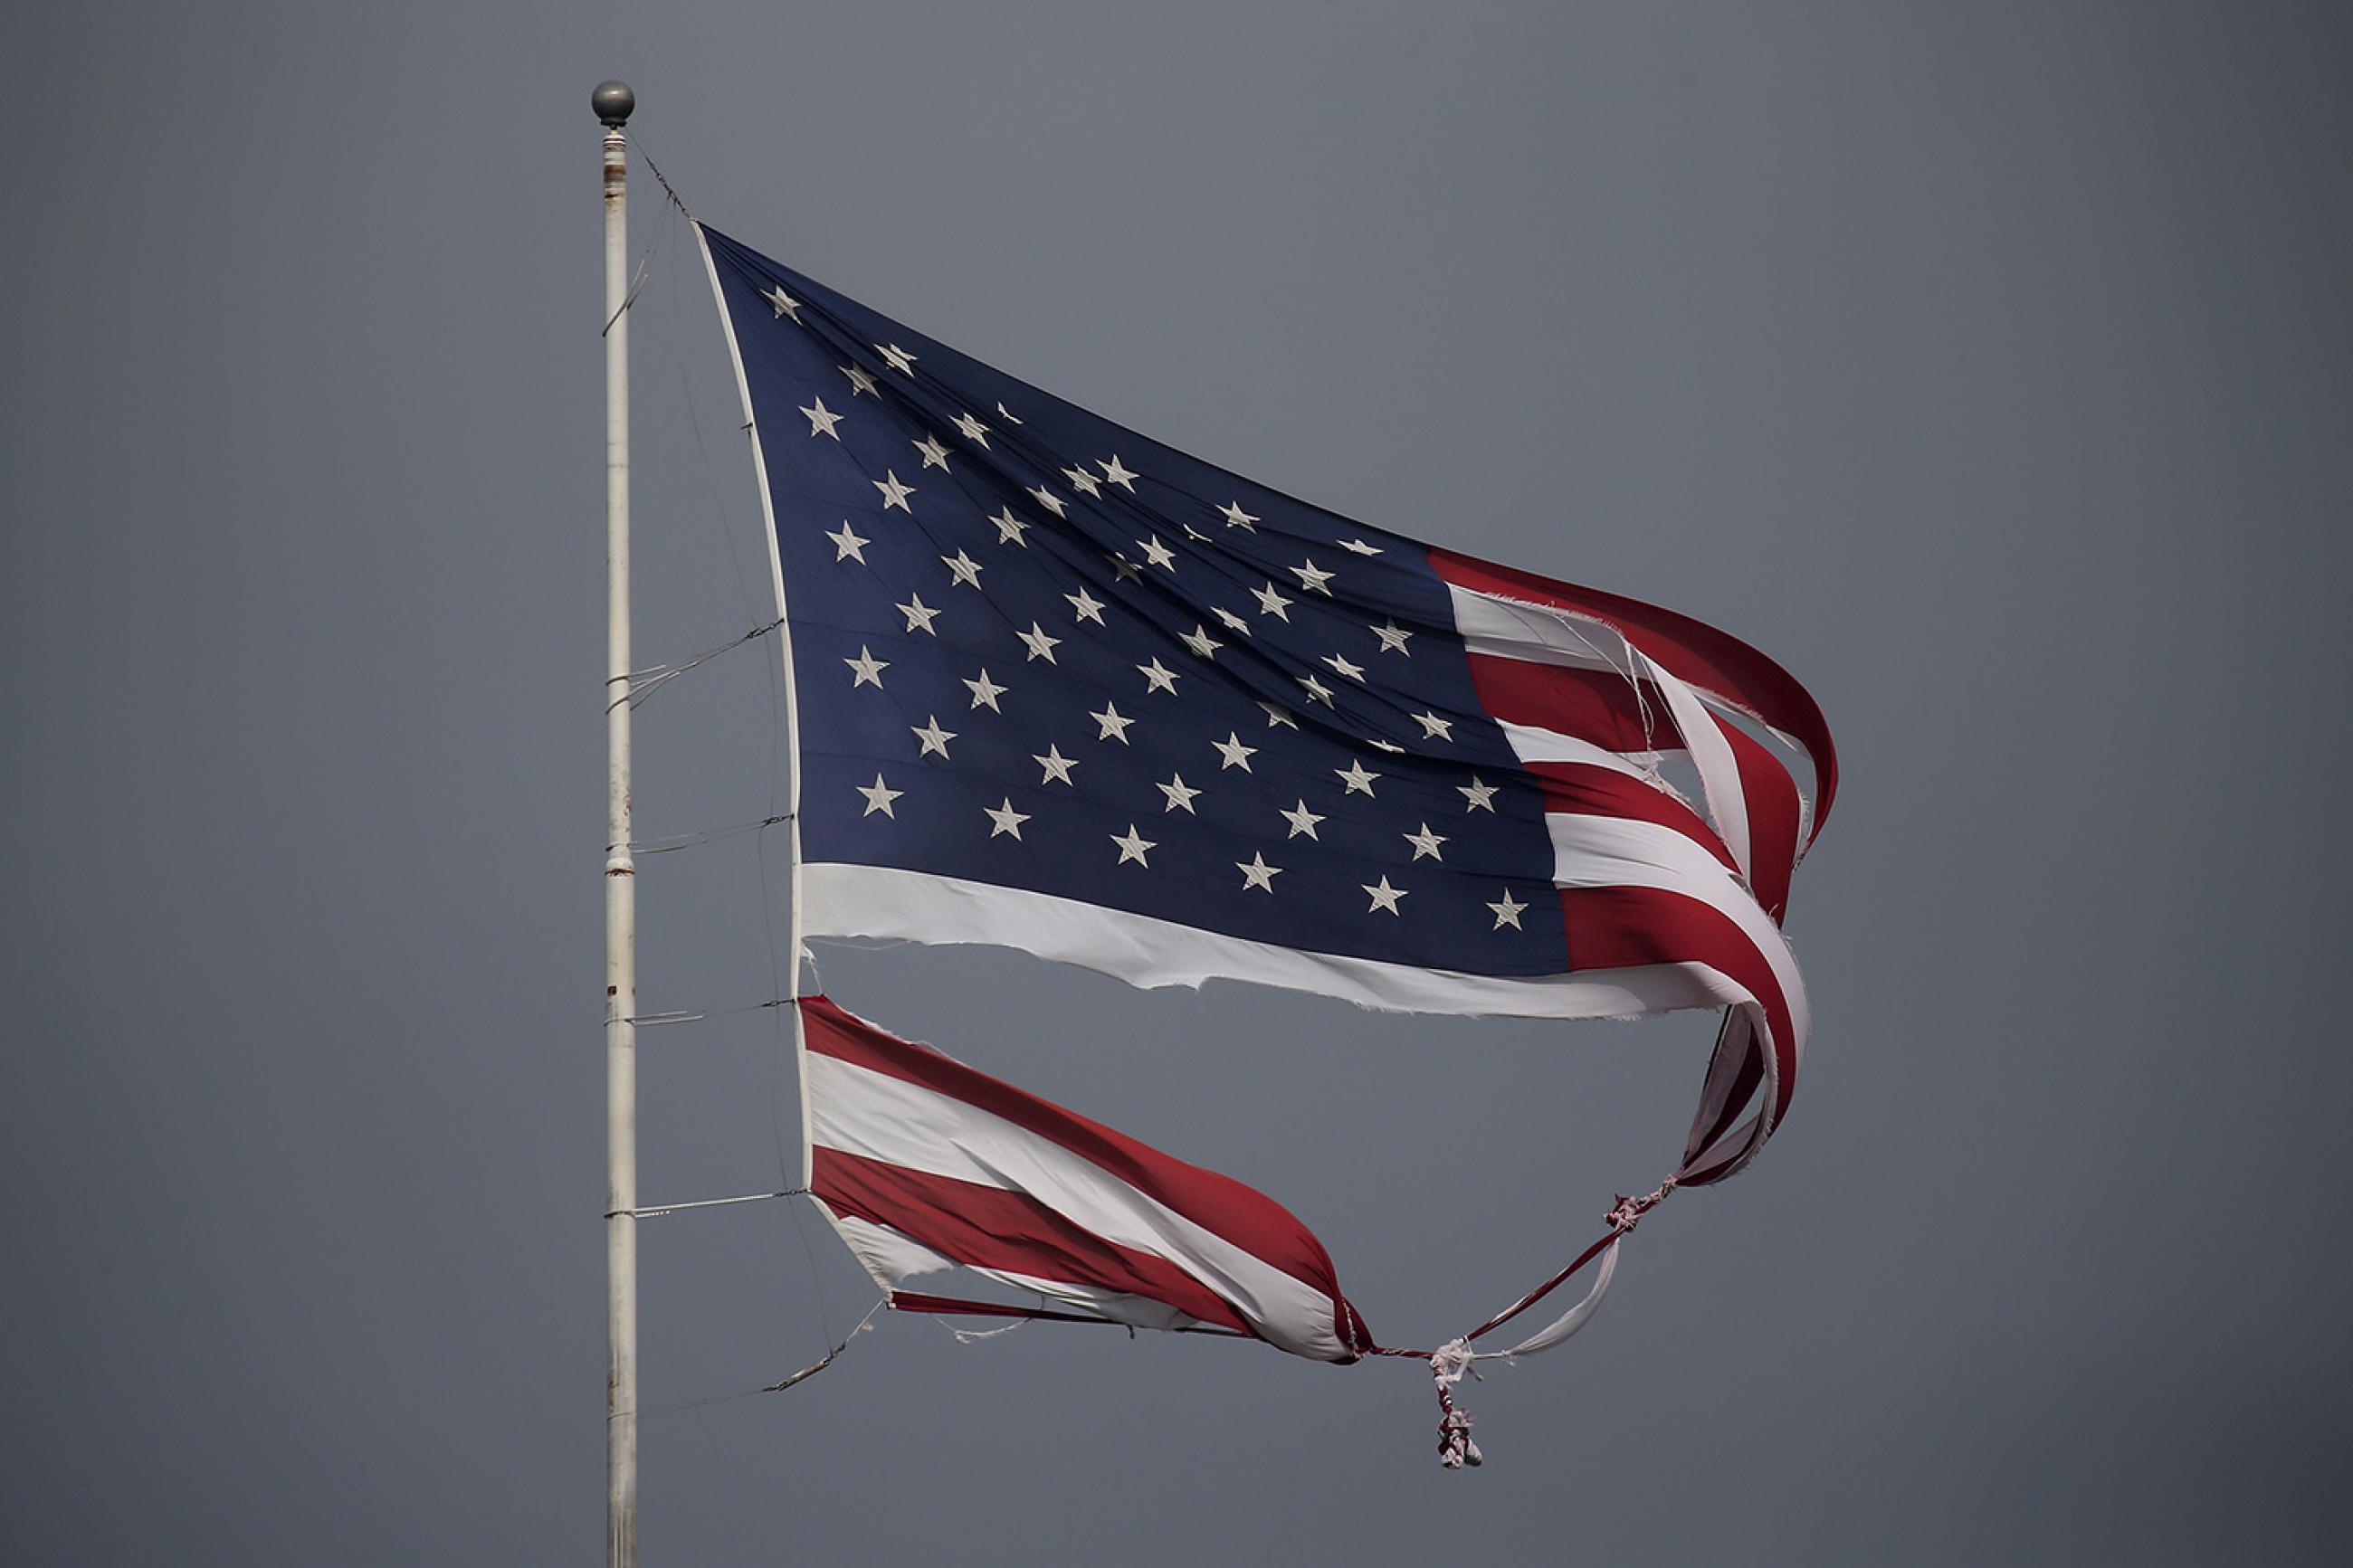 A tattered U.S. flag damaged in Hurricane Harvey, flies in Conroe, Texas, on August 29, 2017. The photo shows a torn U.S. flag blowing against a dark grey sky. REUTERS/Carlo Allegri